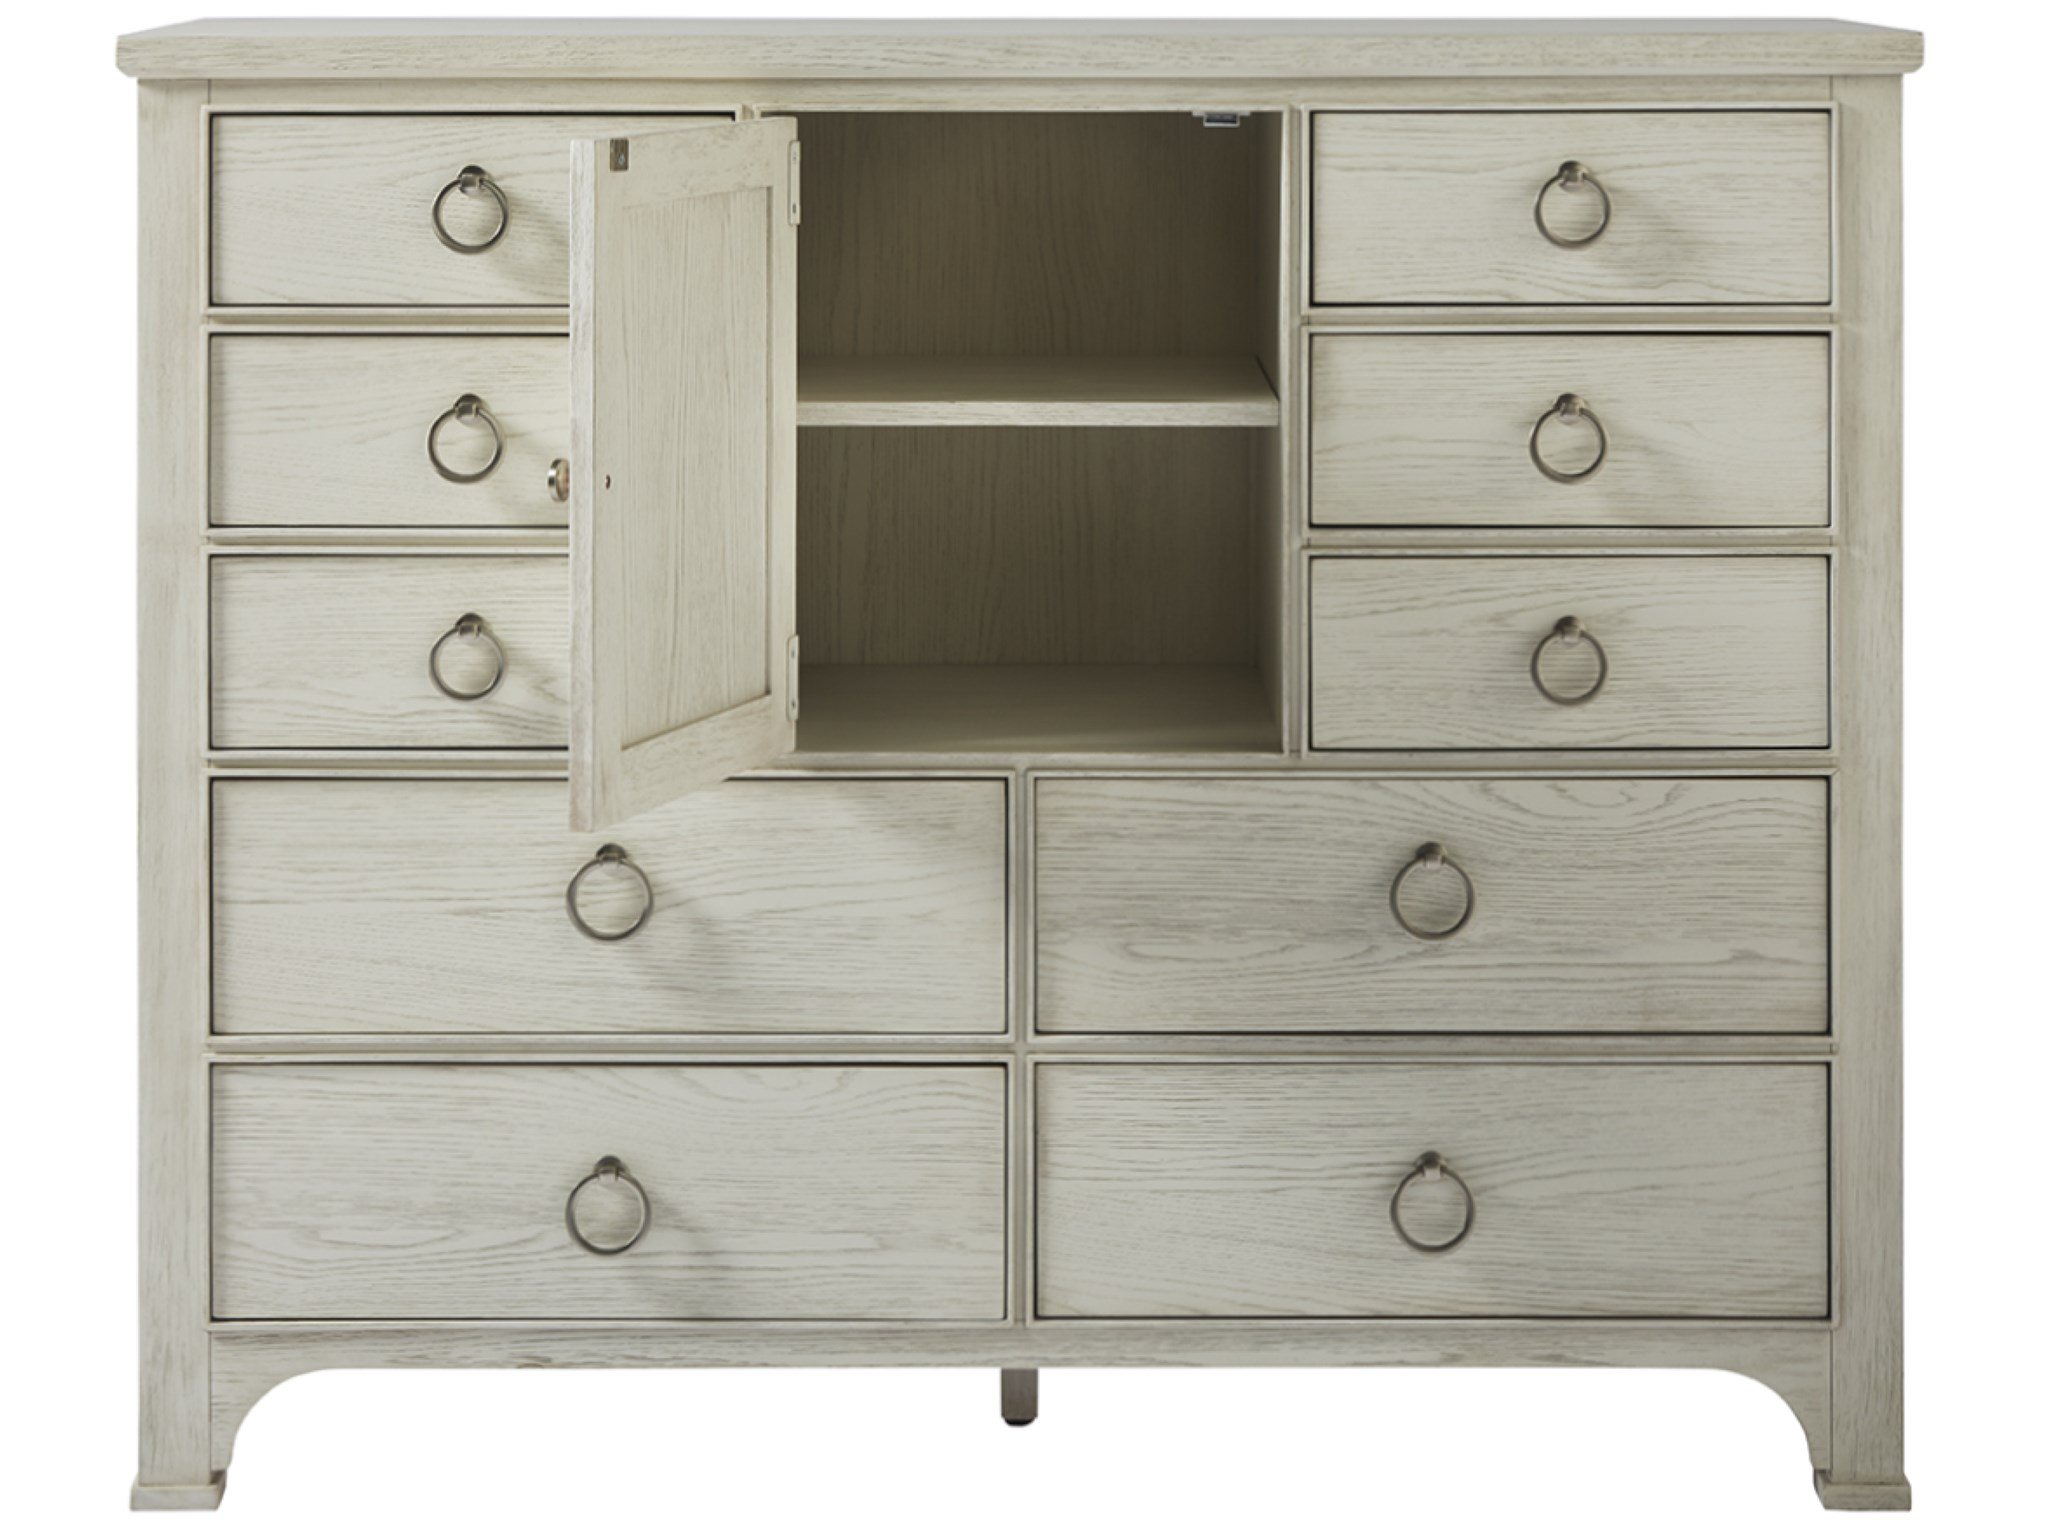 The Escape Dressing Chest